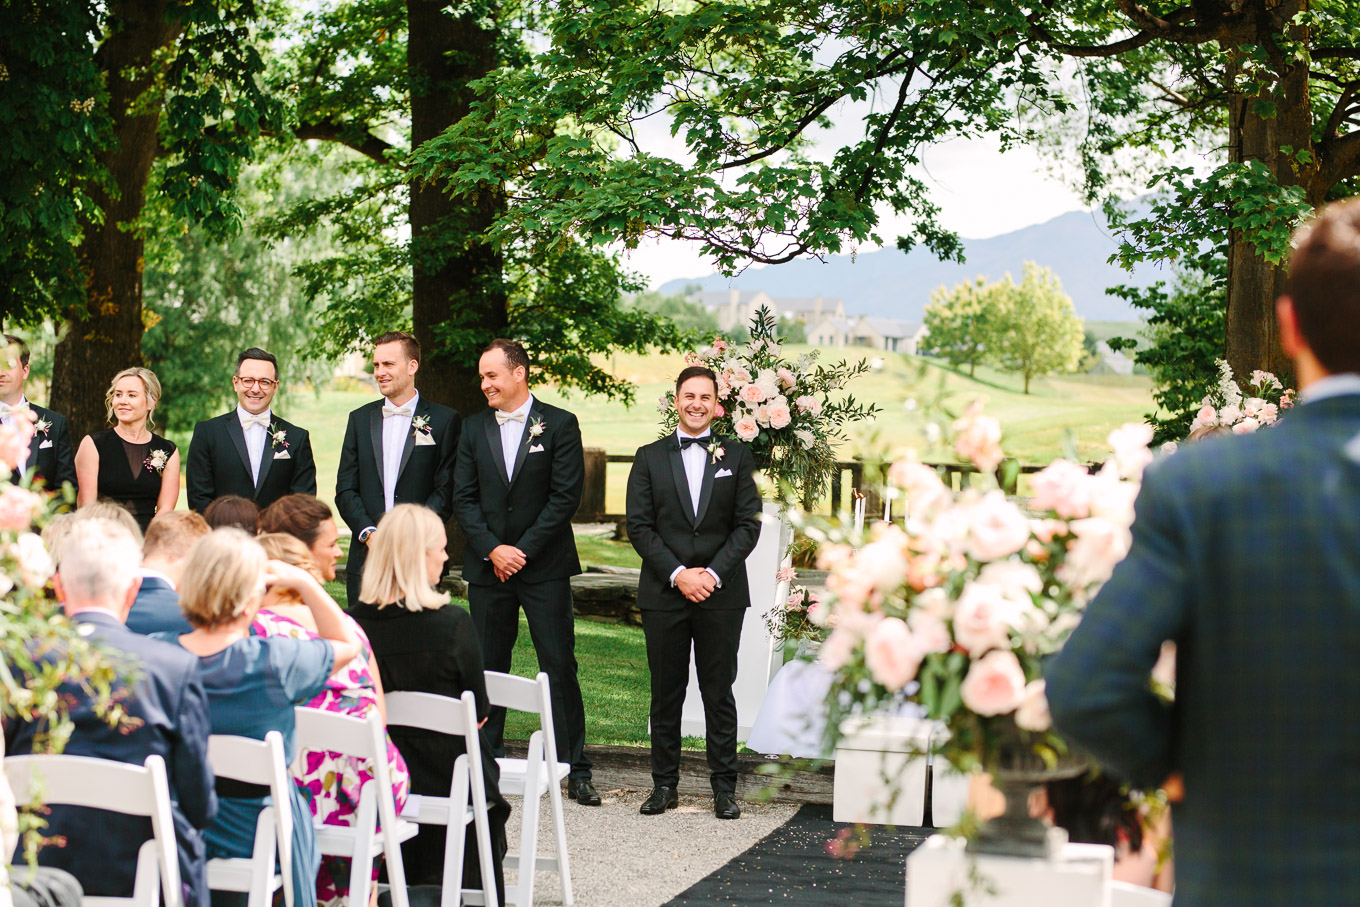 Groom lining up at wedding ceremony. Millbrook Resort Queenstown New Zealand wedding by Mary Costa Photography | www.marycostaweddings.com